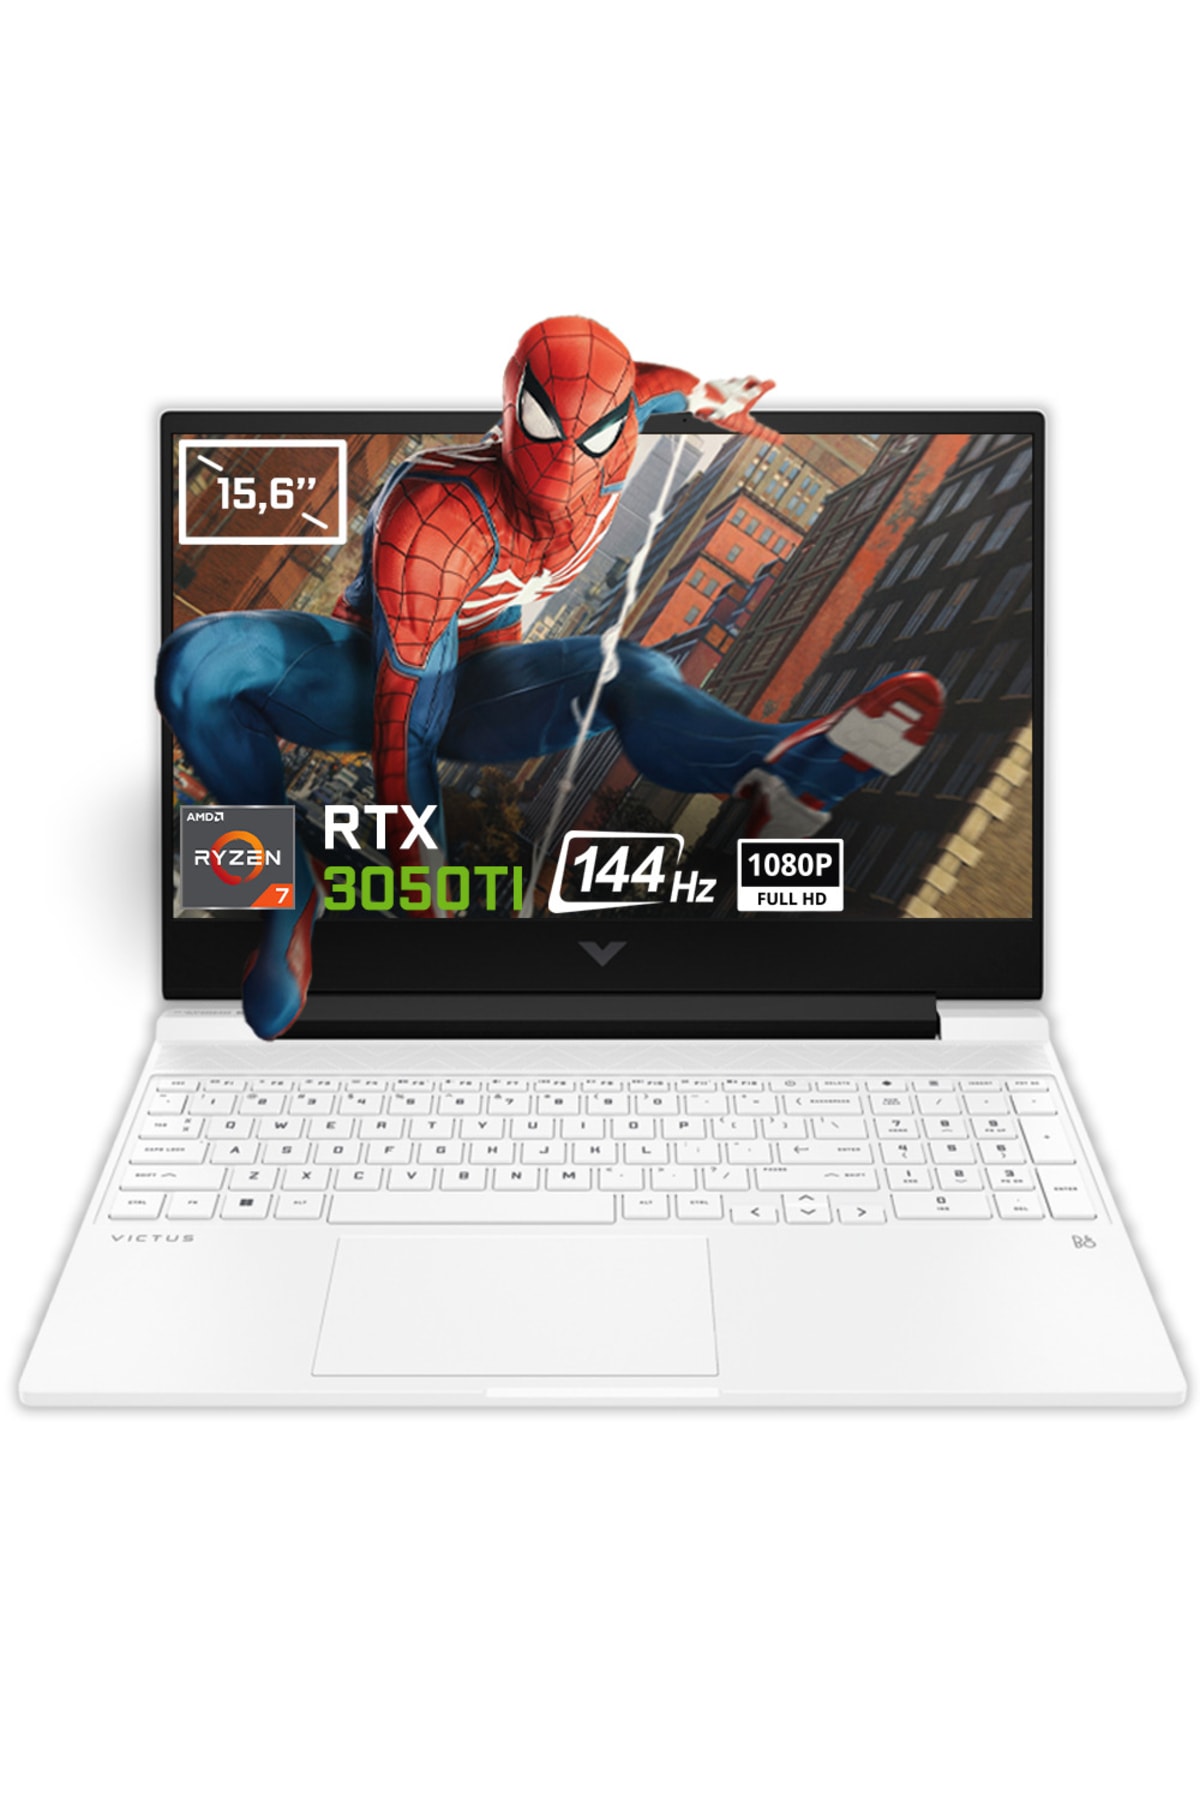 HP Vıctus 71t71ea 15-fb0004nt Ryzen 7 5800h 16gb 512gb Ssd Rtx3050ti 15.6' 144hz Fhd Gaming Notebook